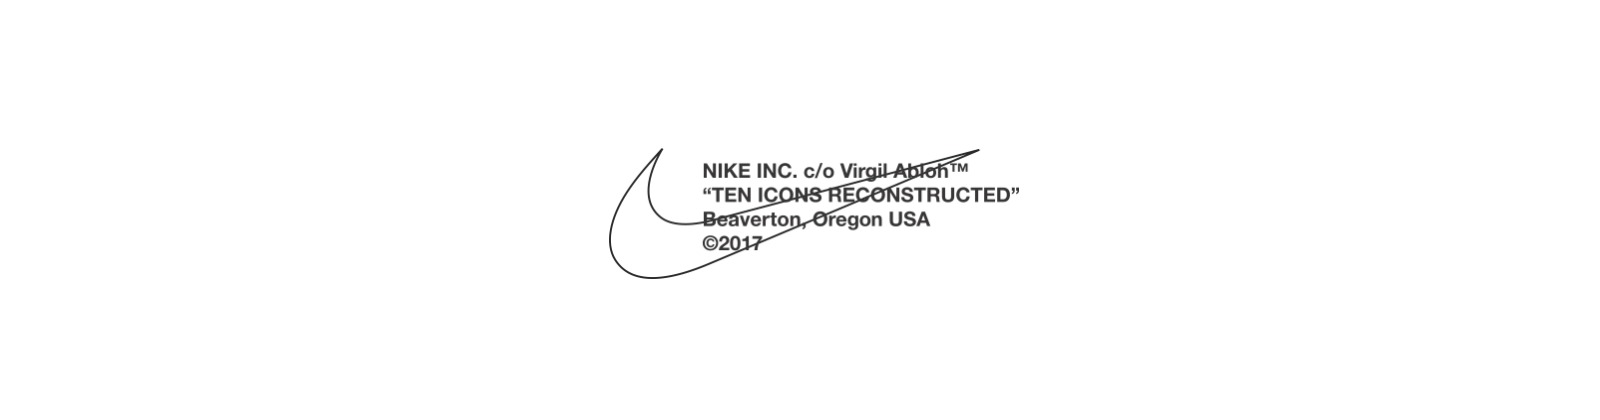 NIKE X VIRGIL ABLOH: TEN ICONS RECONSTRUCTED